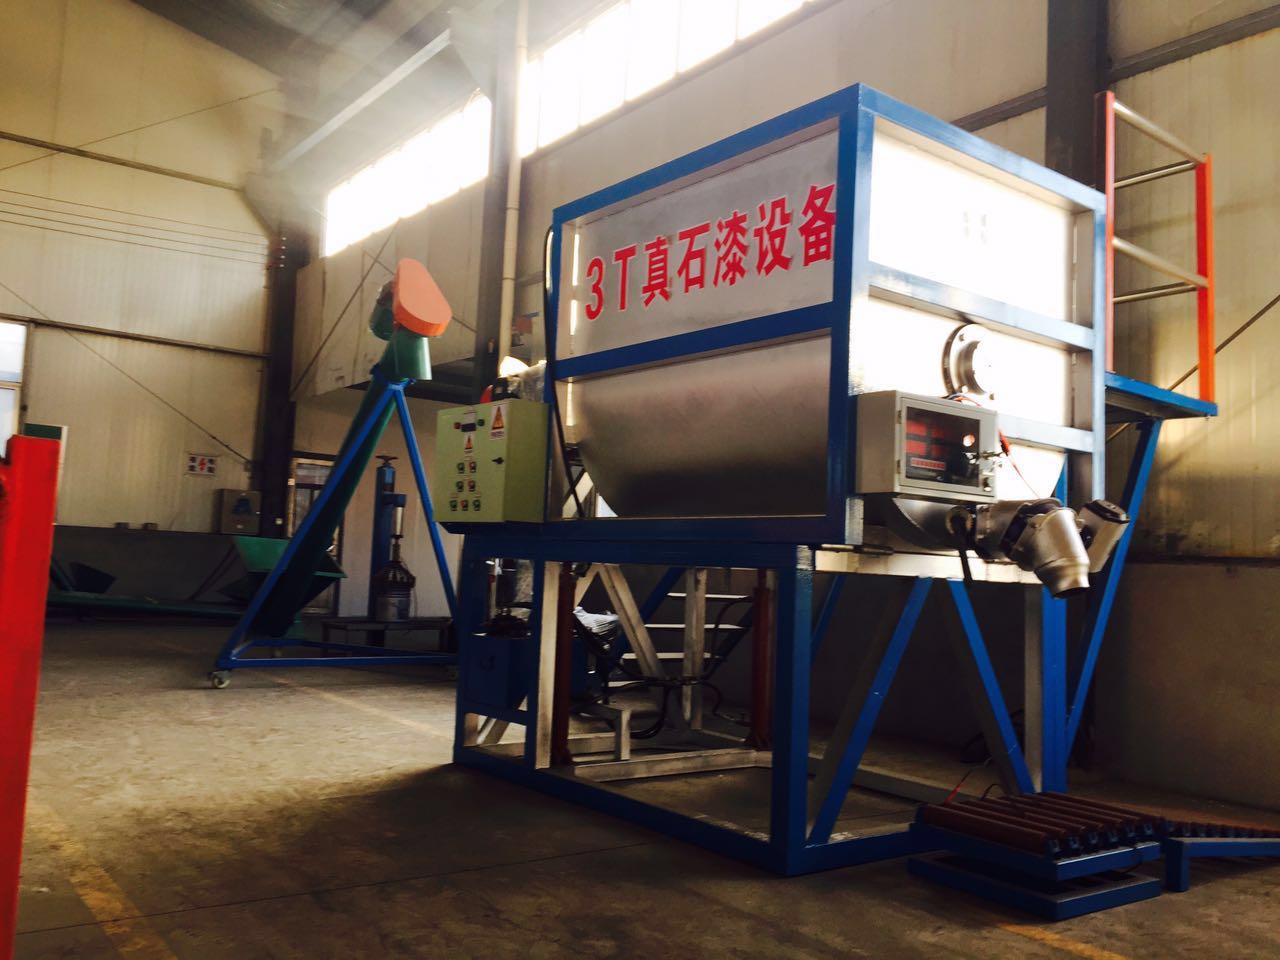 3 tons of horizontal real stone paint production equipment